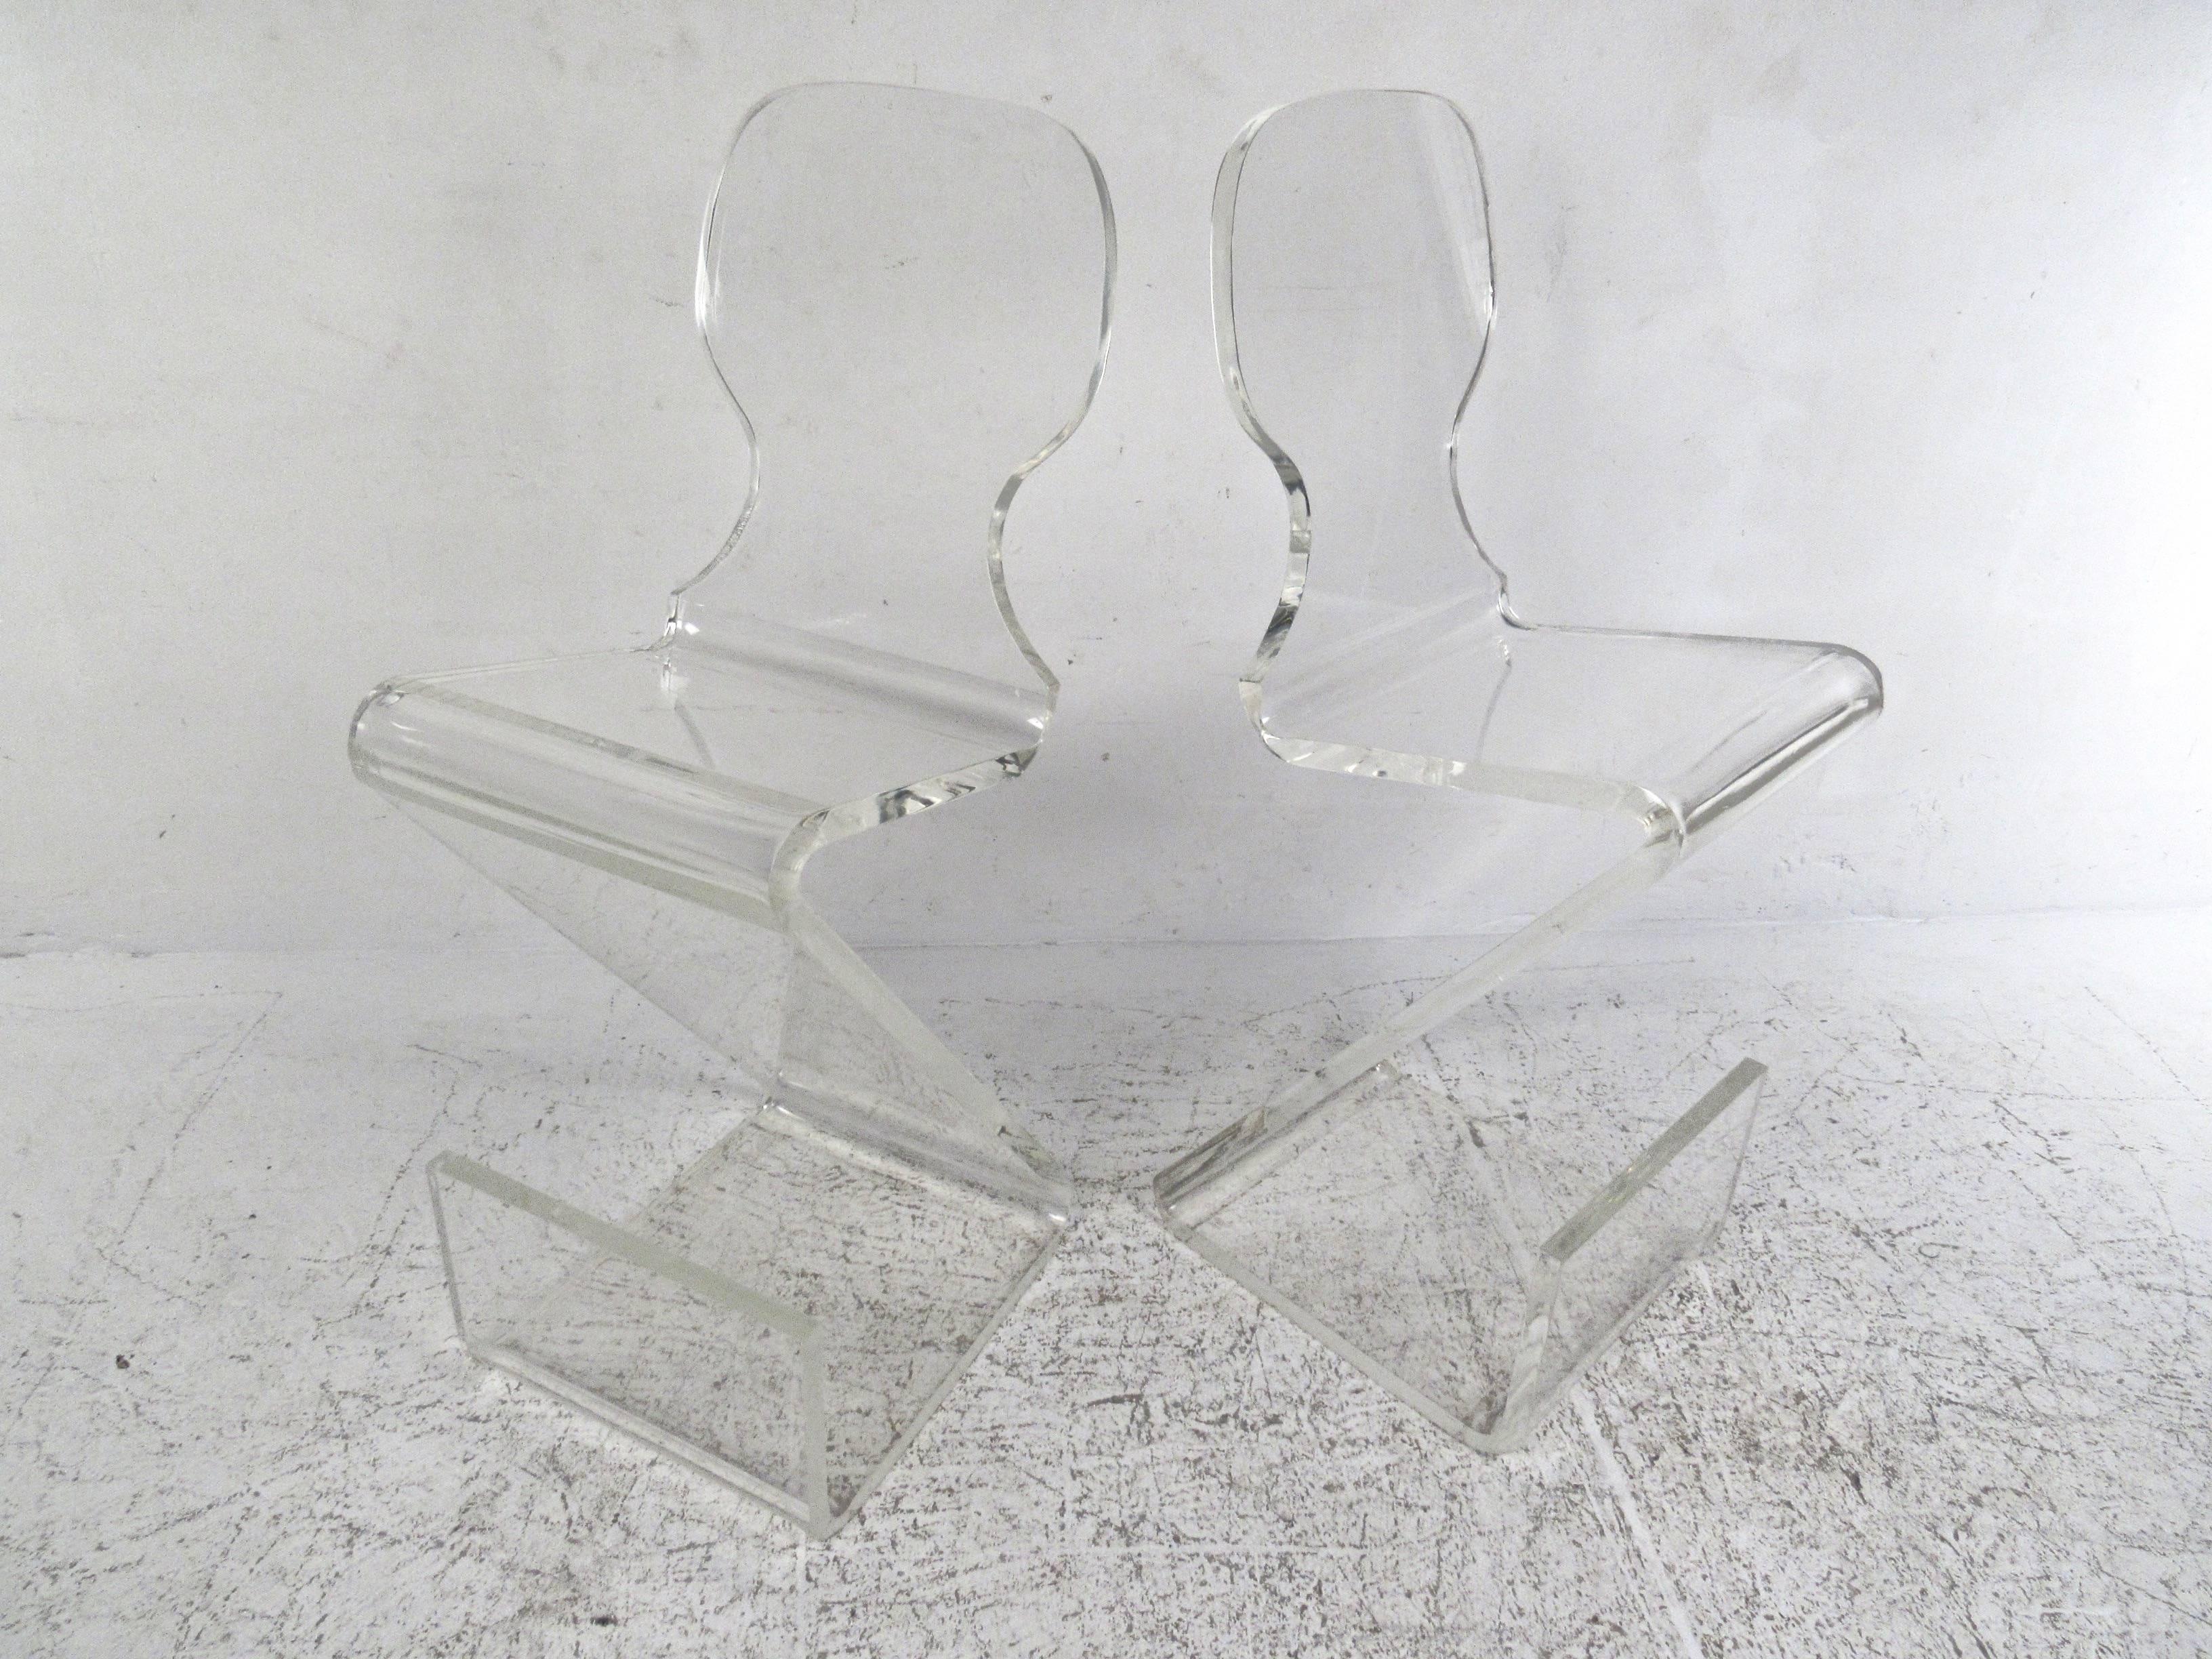 This pair of vintage Z-style stools feature unique sculpted Lucite construction with cantilever base and stylish modern lines. This Gary Gutterman design makes a wonderful addition to home or business bar or counter display. Please confirm item